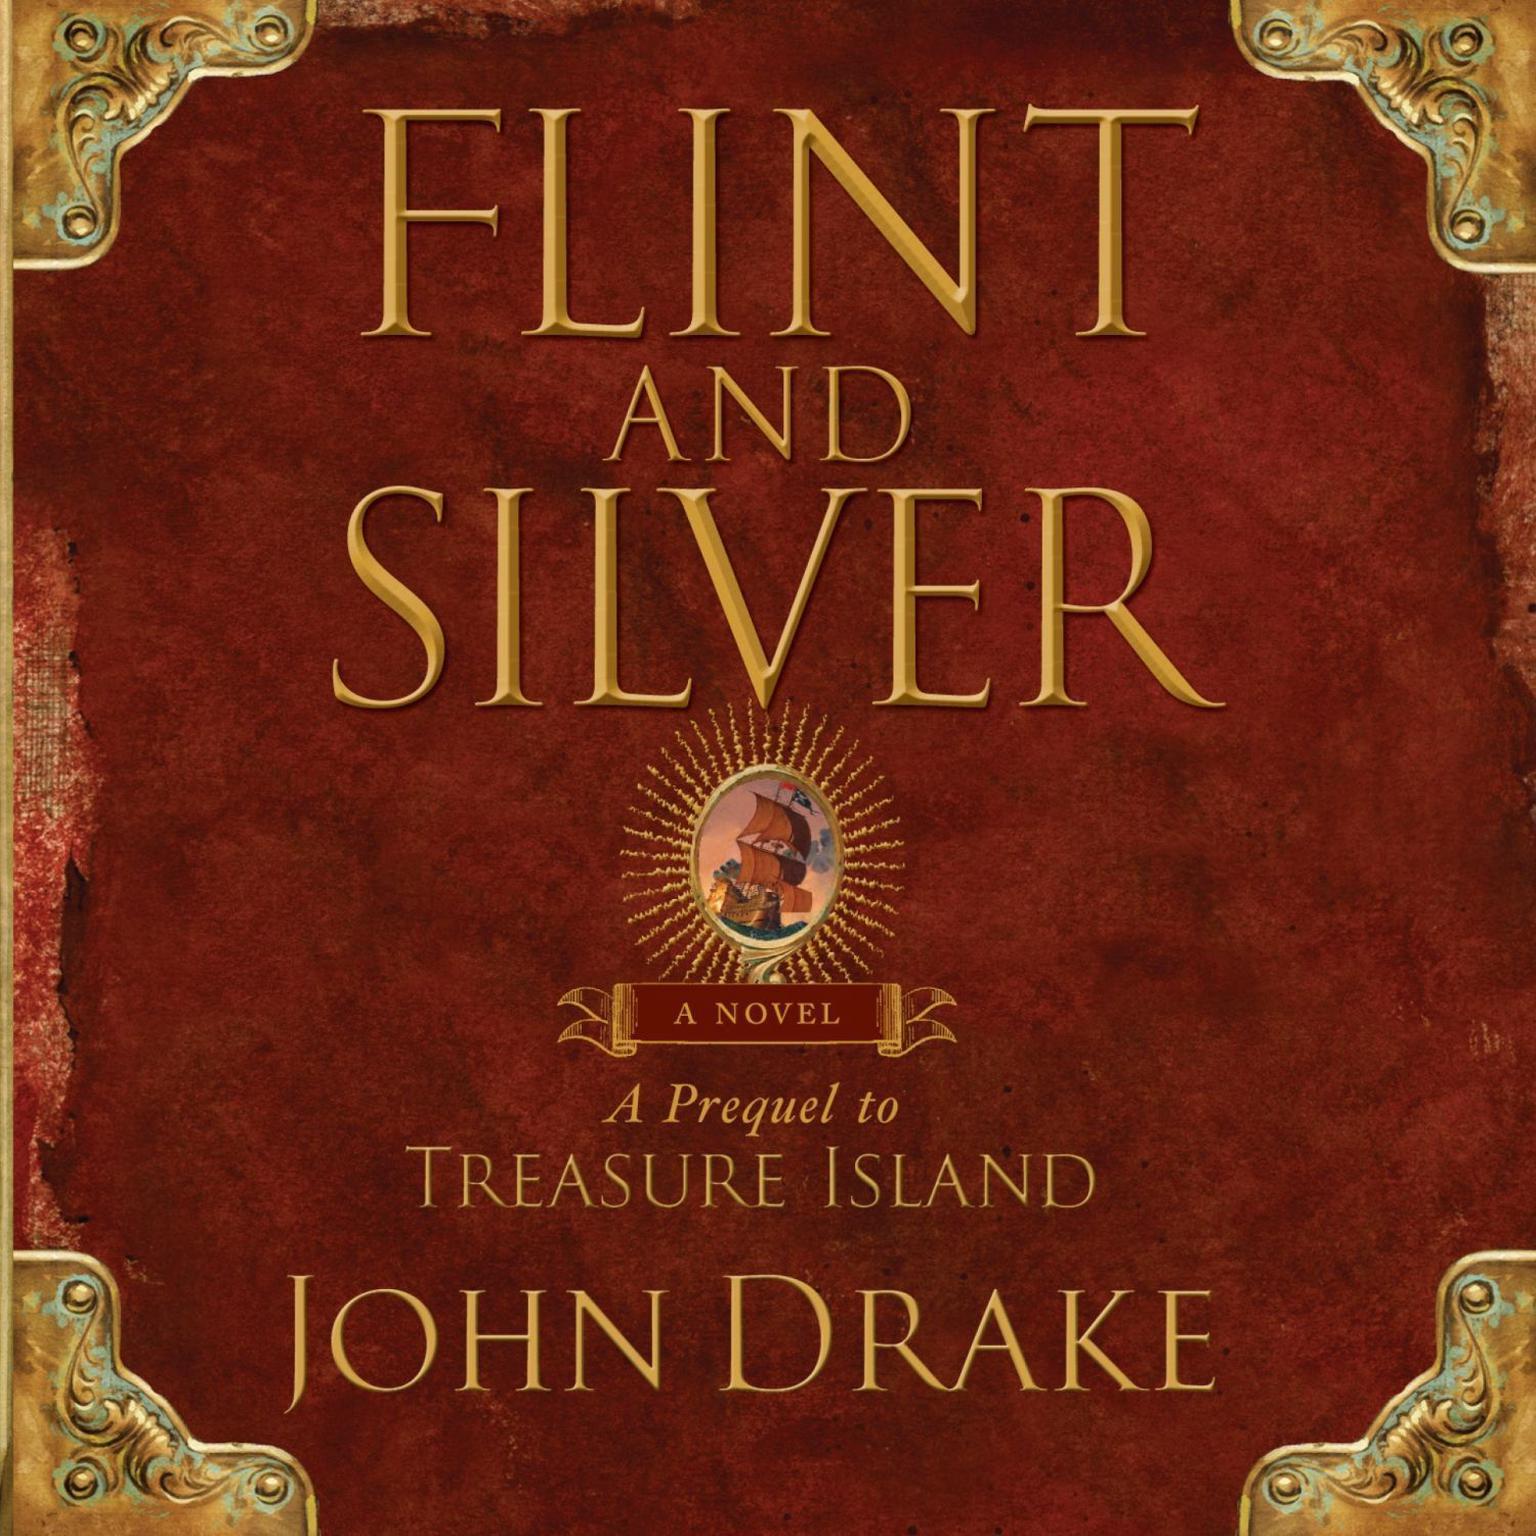 Flint and Silver (Abridged): A Prequel to Treasure Island Audiobook, by John Drake